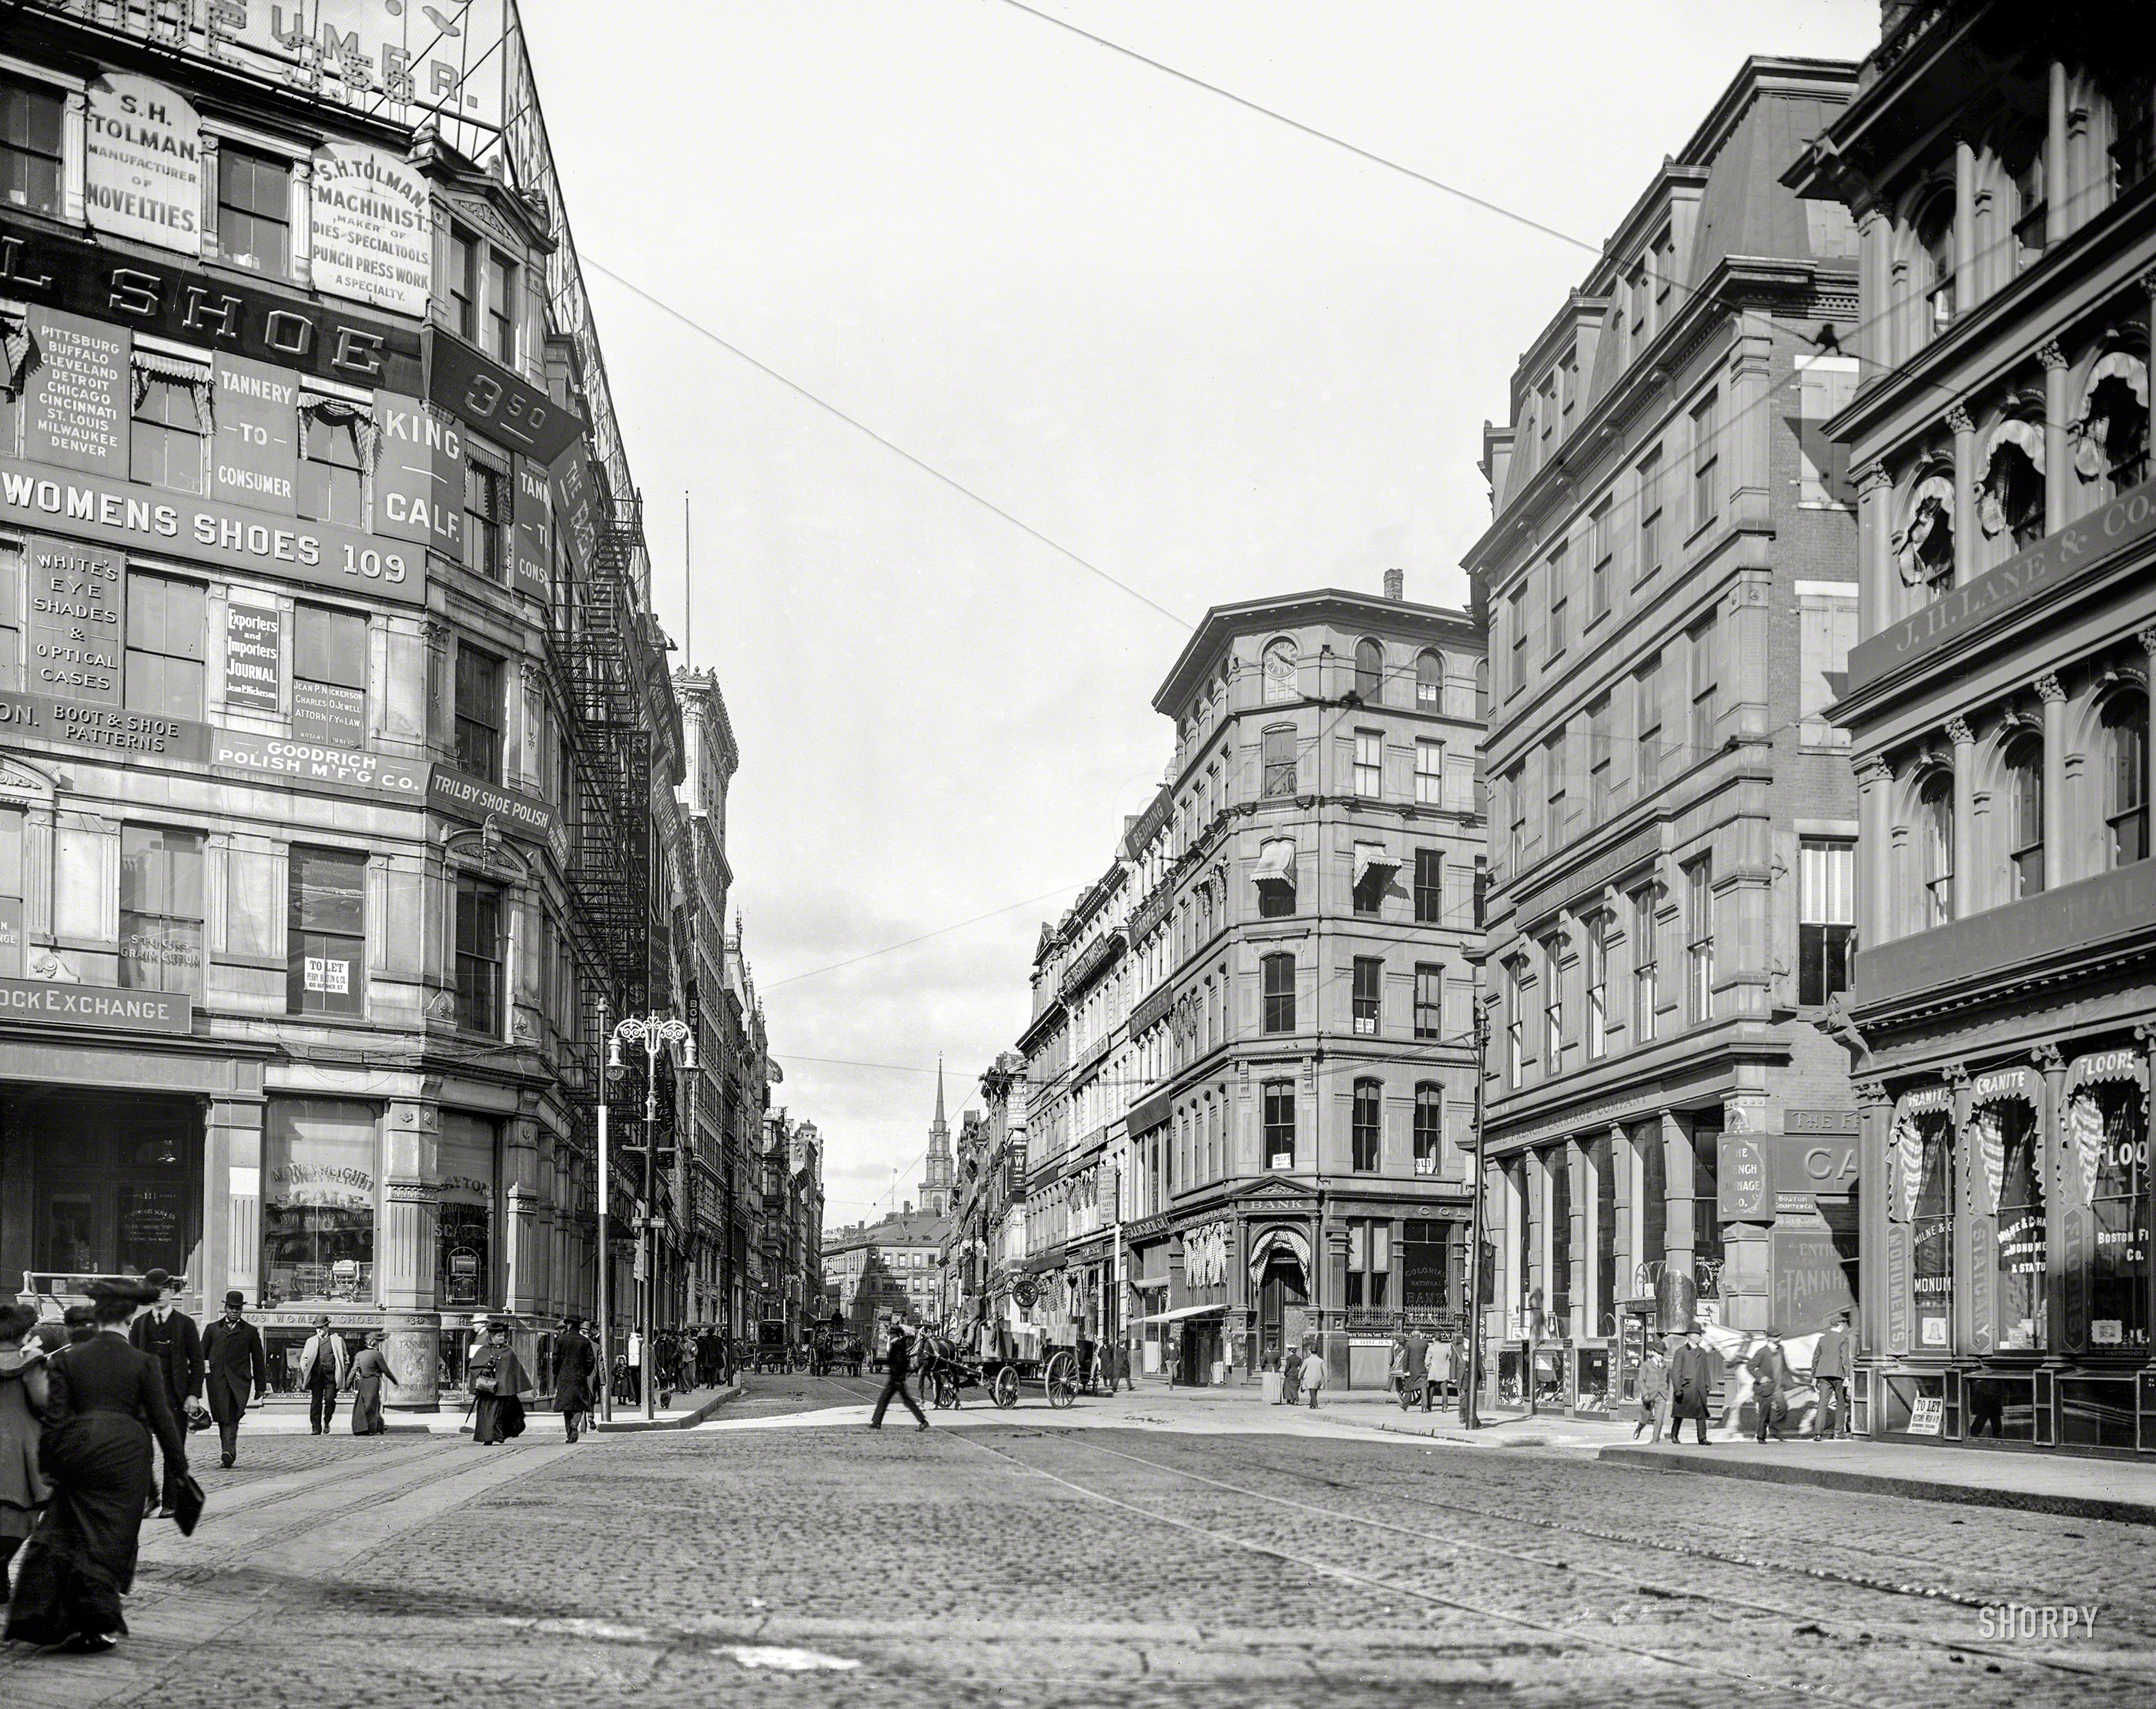 Circa 1904. "Summer Street in Boston, Mass." With much idiosyncratic signage. 8x10 inch dry plate glass negative, Detroit Publishing Company. View full size.